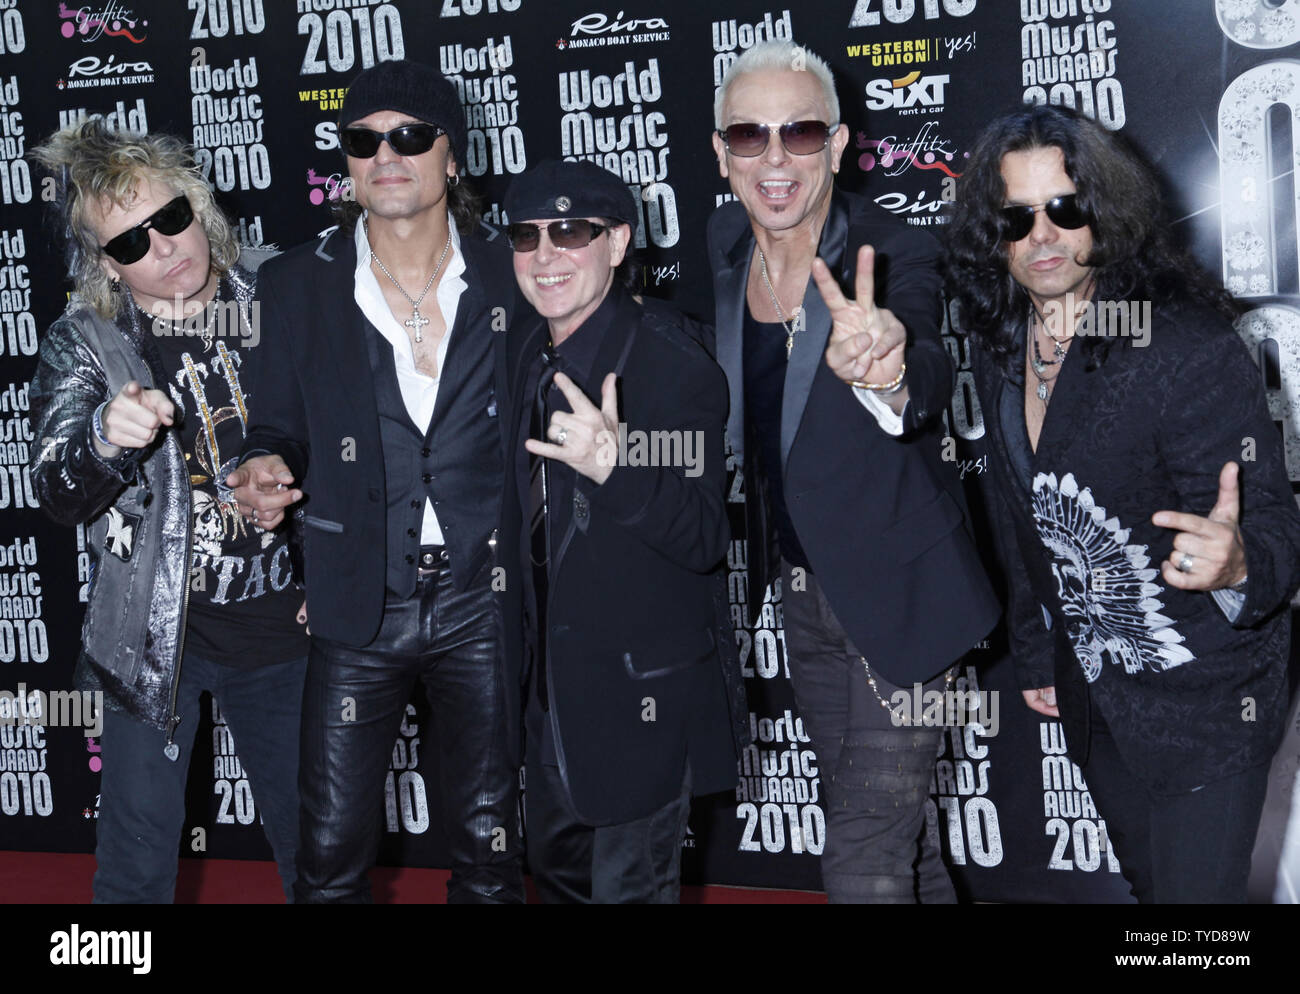 (From L to R) James Kottak, Matthias Jabs, Klaus Meine, Rudolf Schenker and Pawel Maciwoda of the band Scorpions arrive on the red carpet before the World Music Awards at the Sporting Club in Monte Carlo, Monaco on May 18, 2010.  The award show raised funds to open an orphanage in earthquake-ravaged Haiti.   UPI/David Silpa Stock Photo